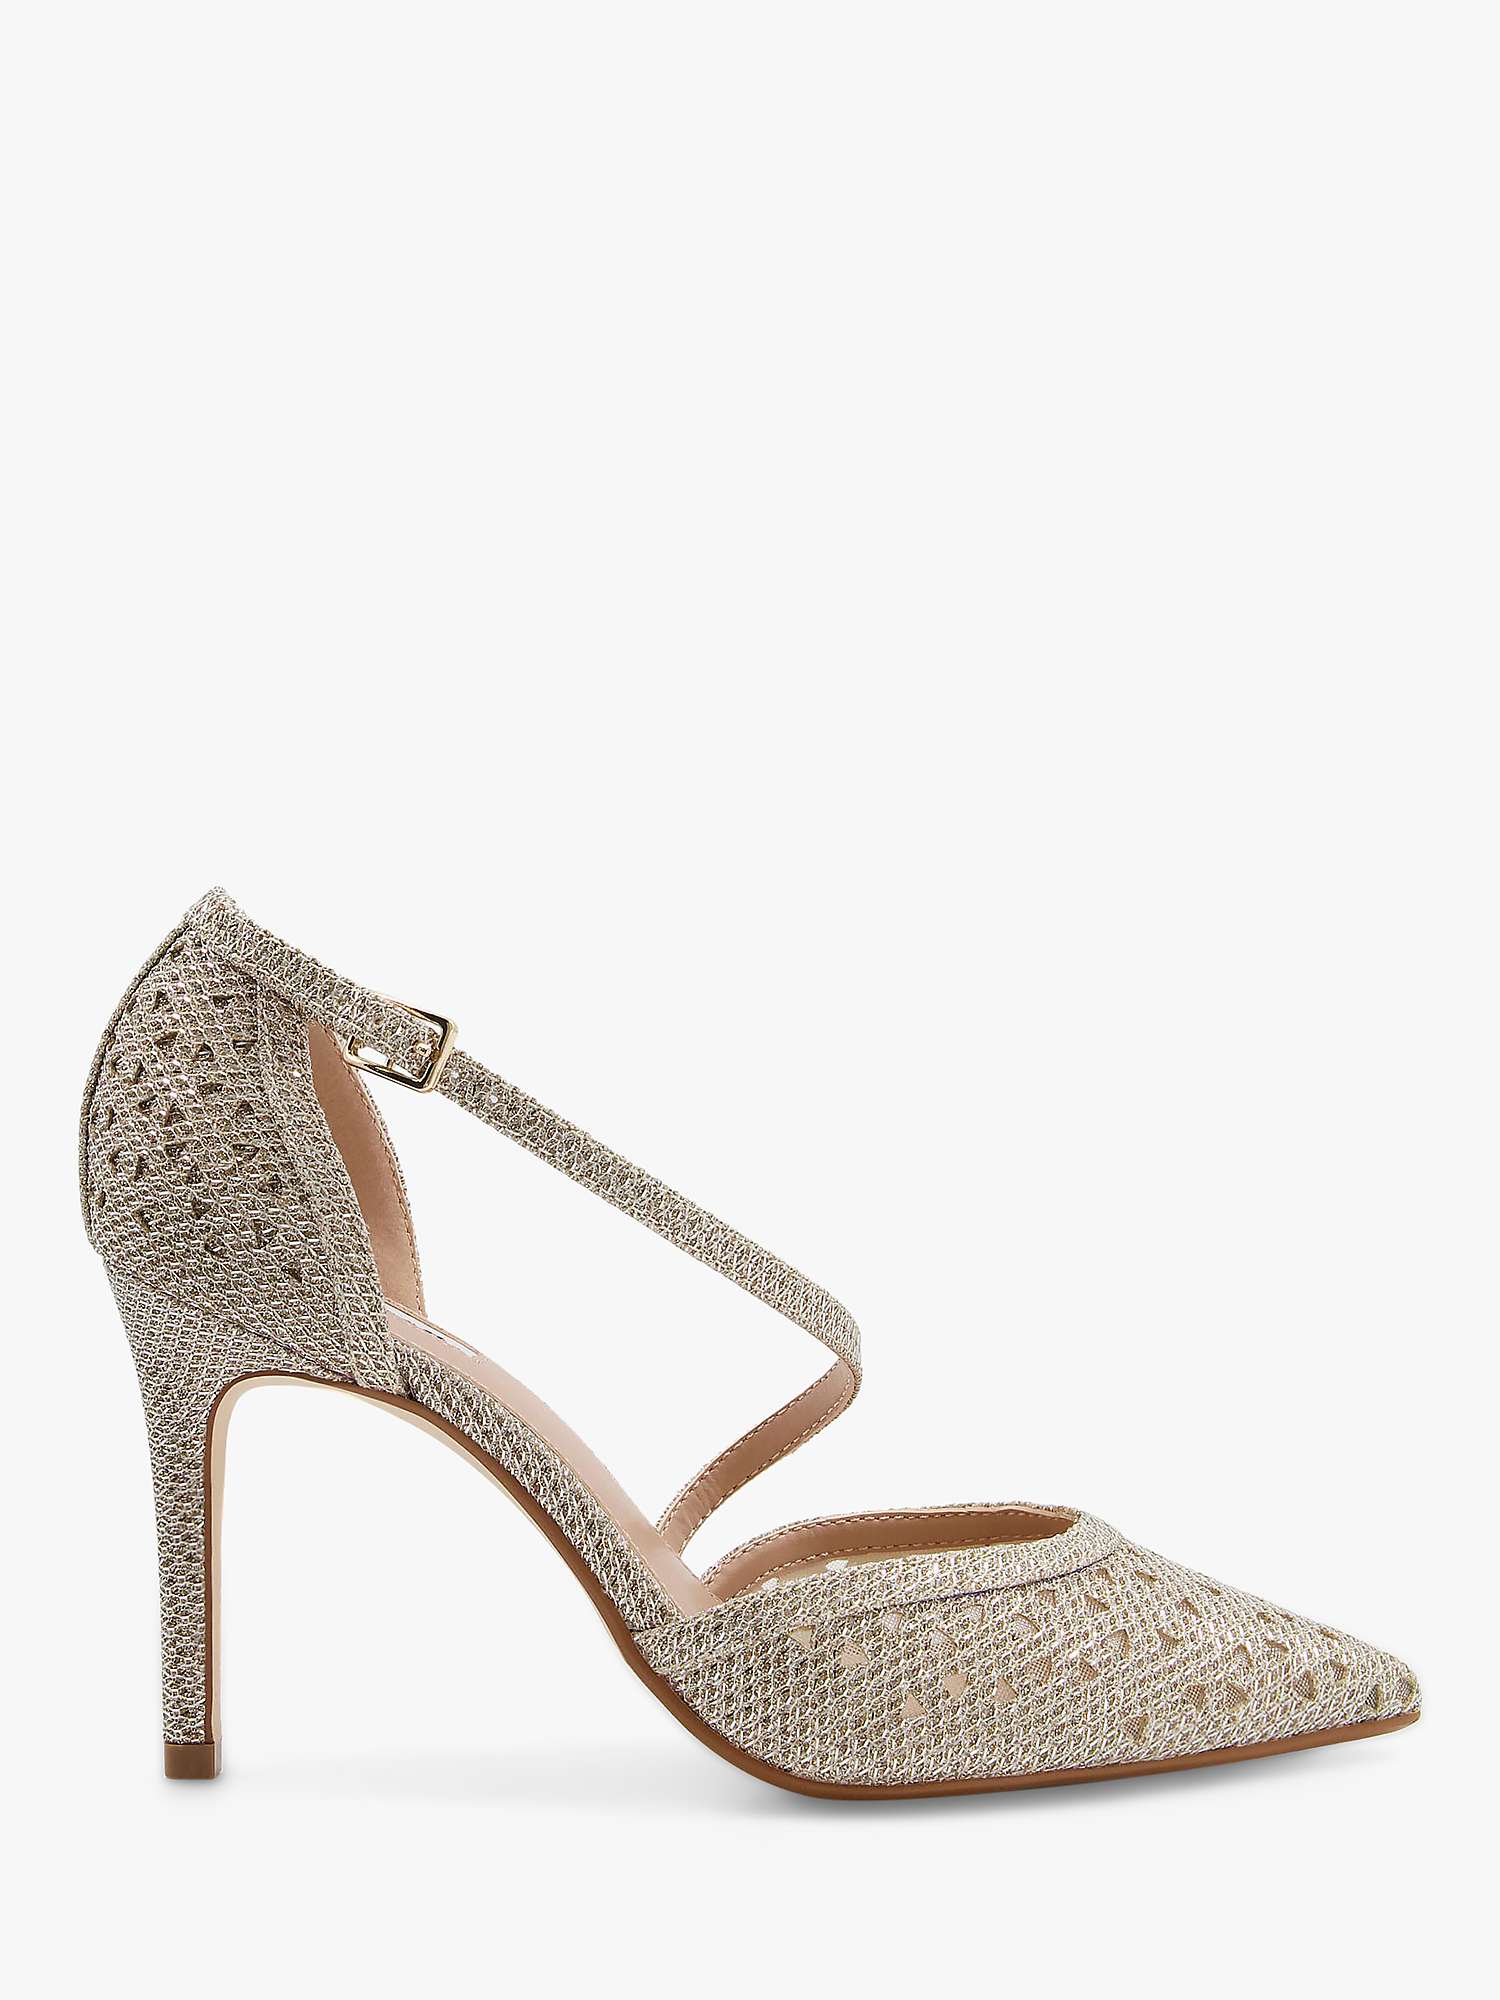 Buy Dune Danae Wide Fit Pointed High Heels, Gold Online at johnlewis.com